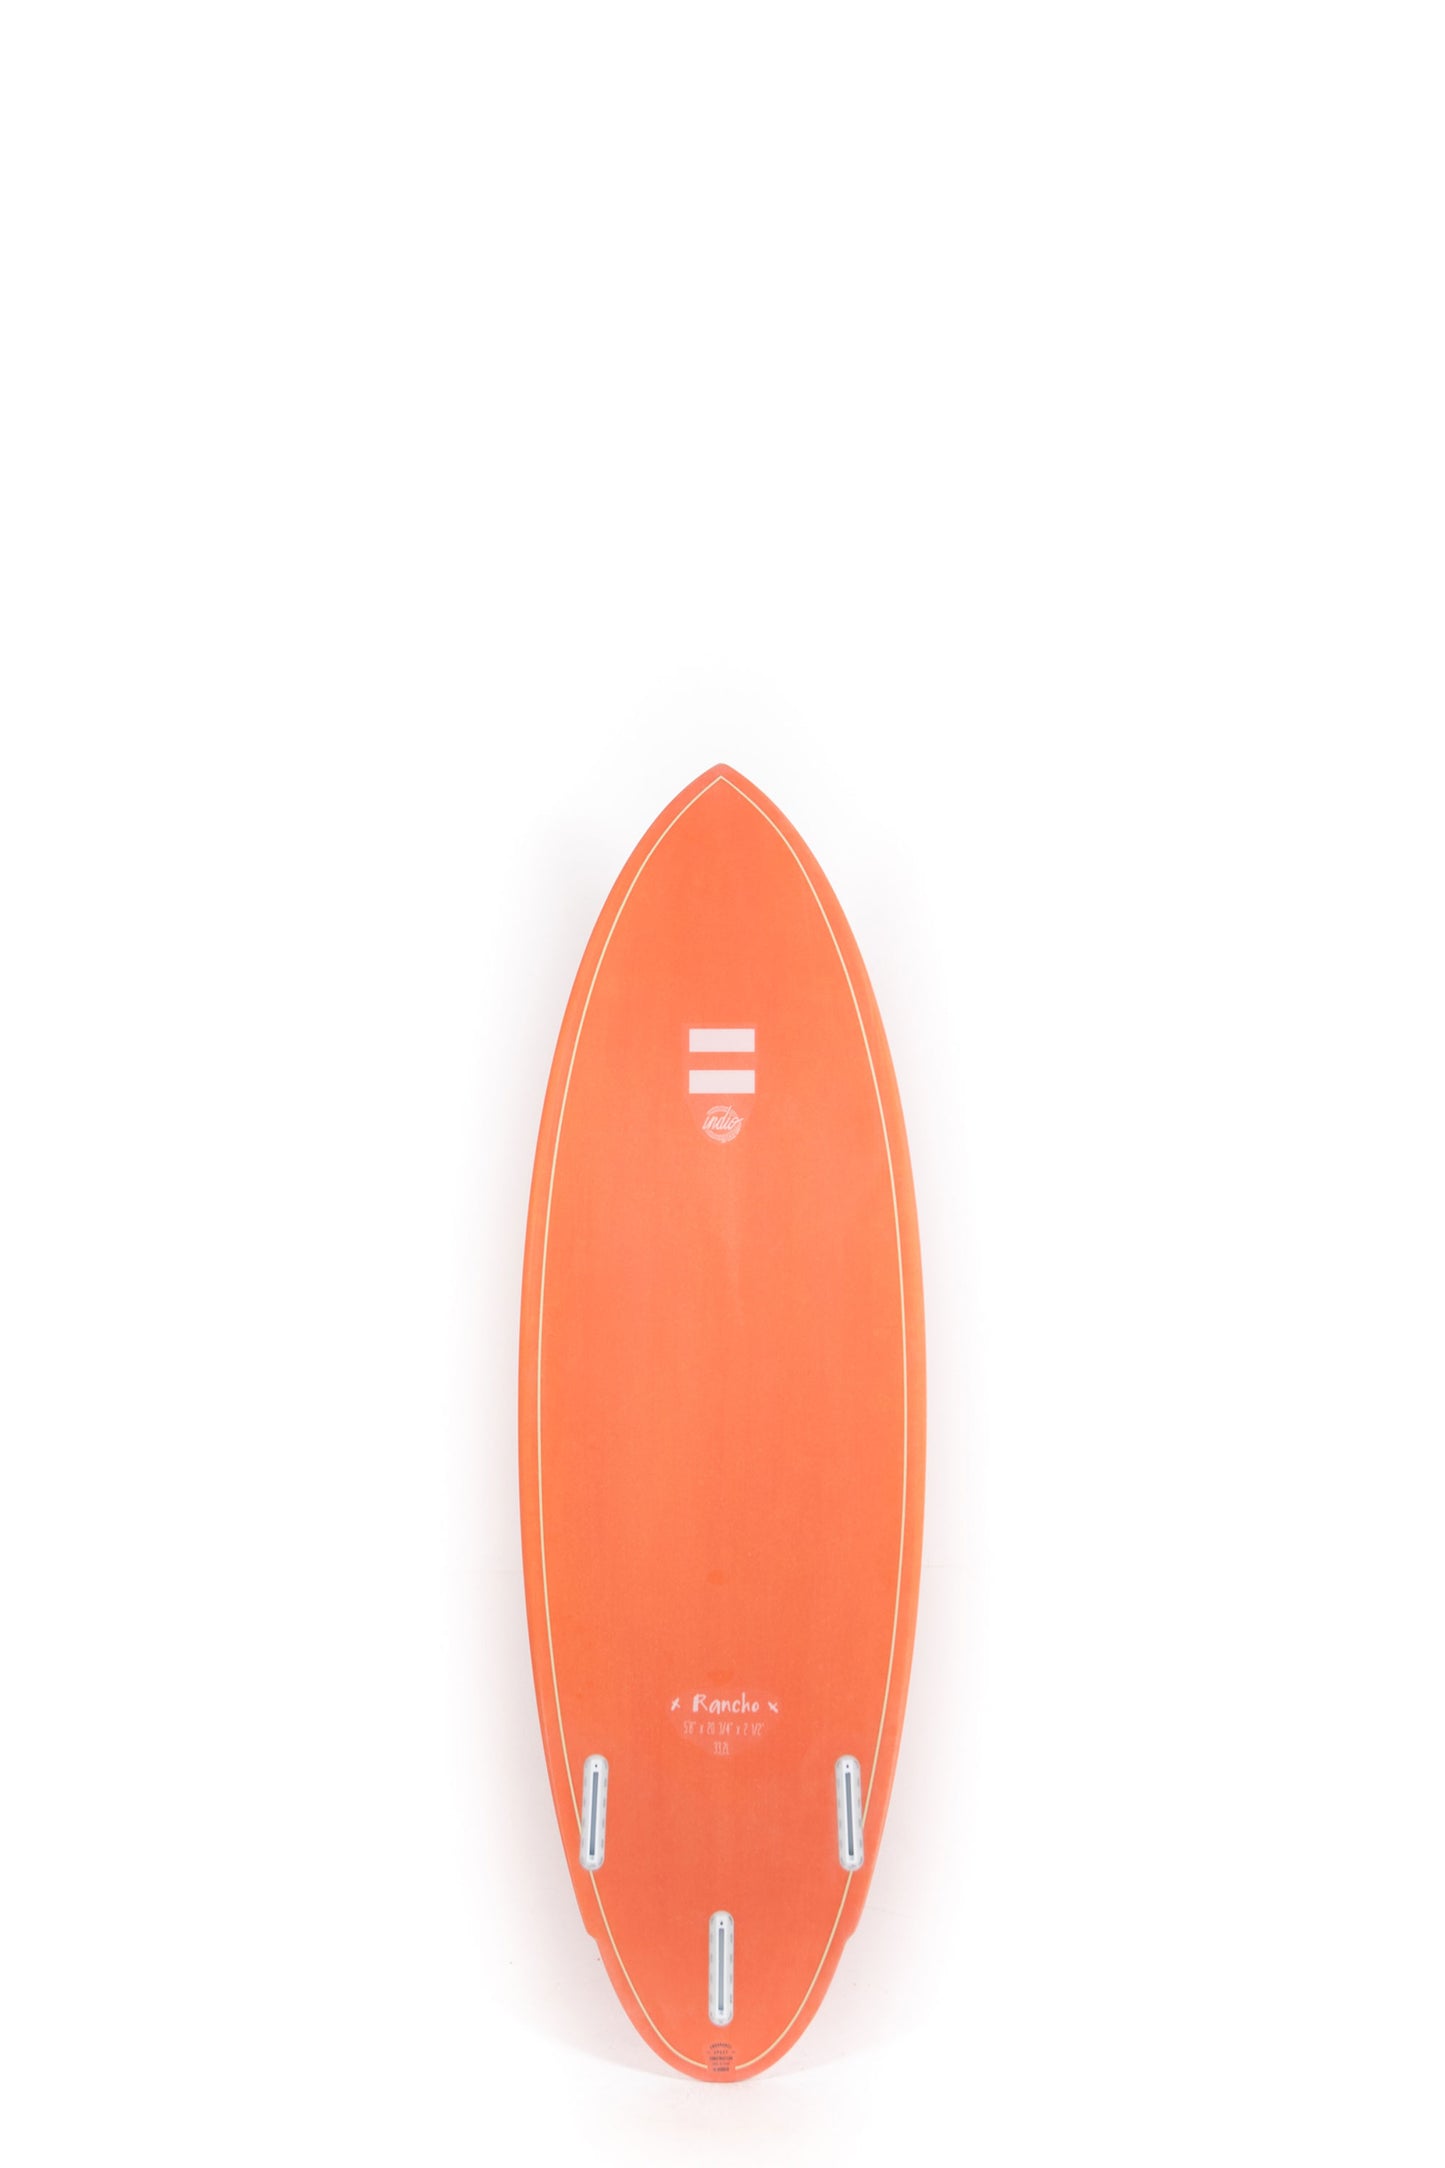 Pukas Surf Shop Indio Surfboards Rancho Red Fall 5'8"